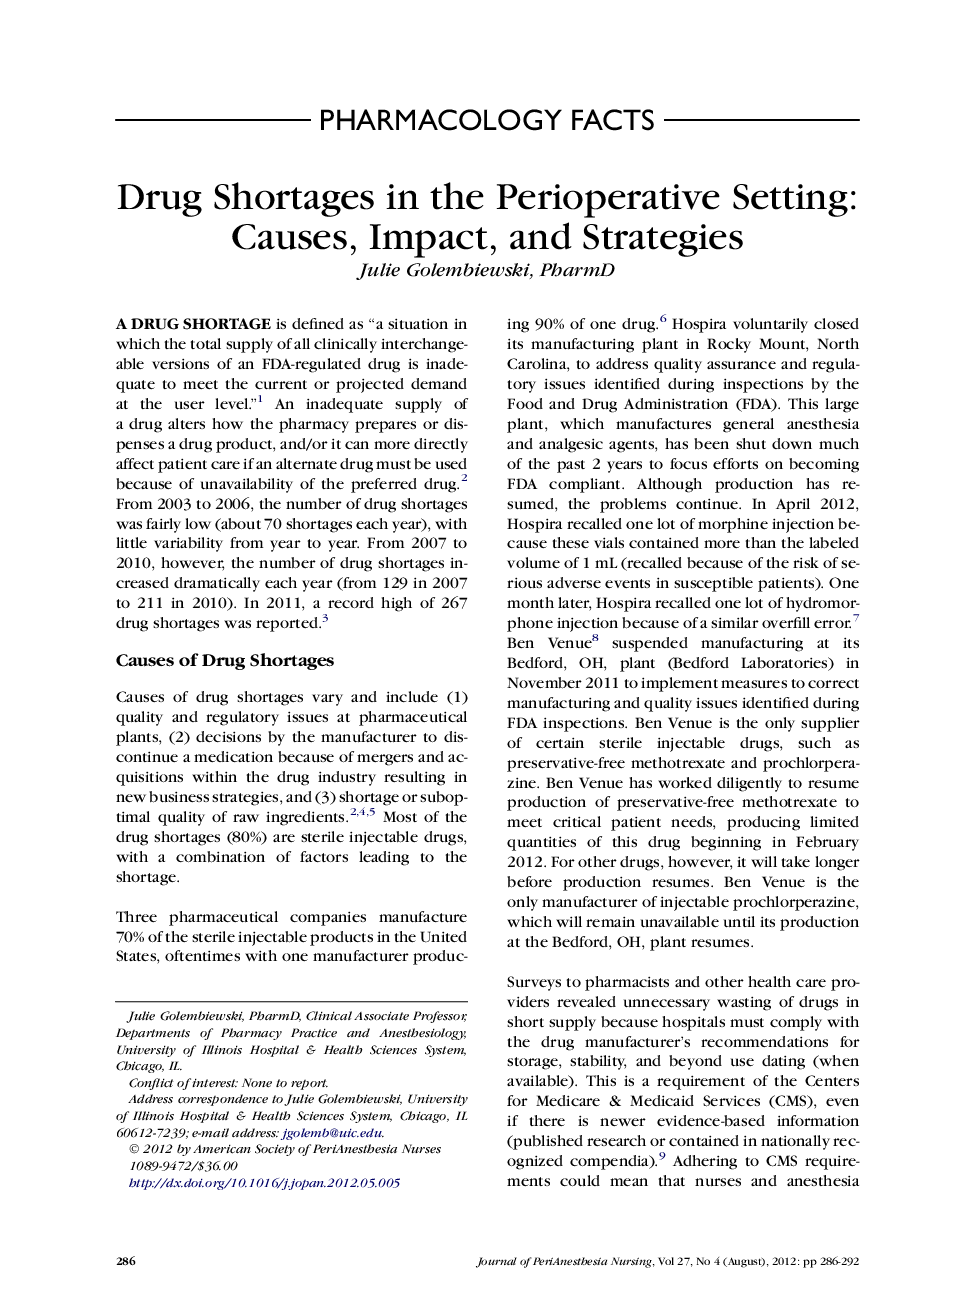 Drug Shortages in the Perioperative Setting: Causes, Impact, and Strategies